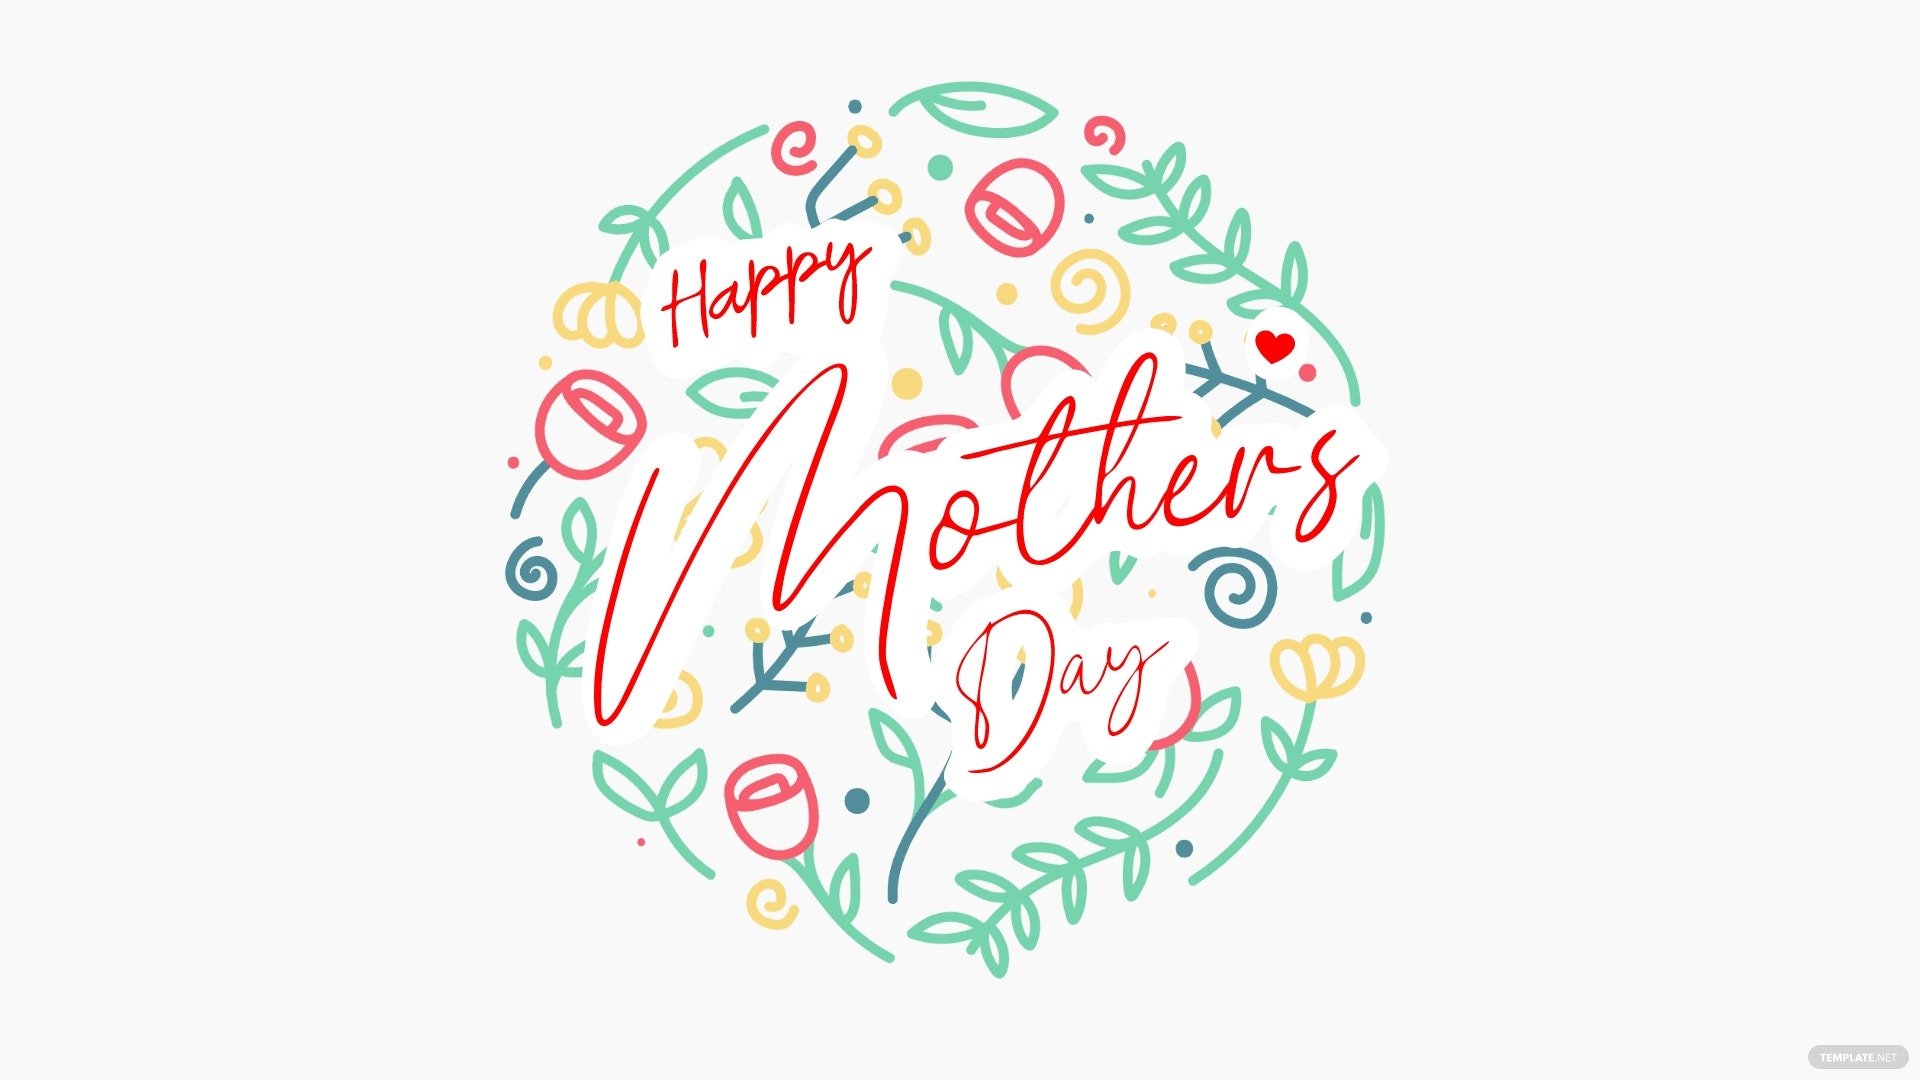 beautiful happy mothers day image ideas and examples